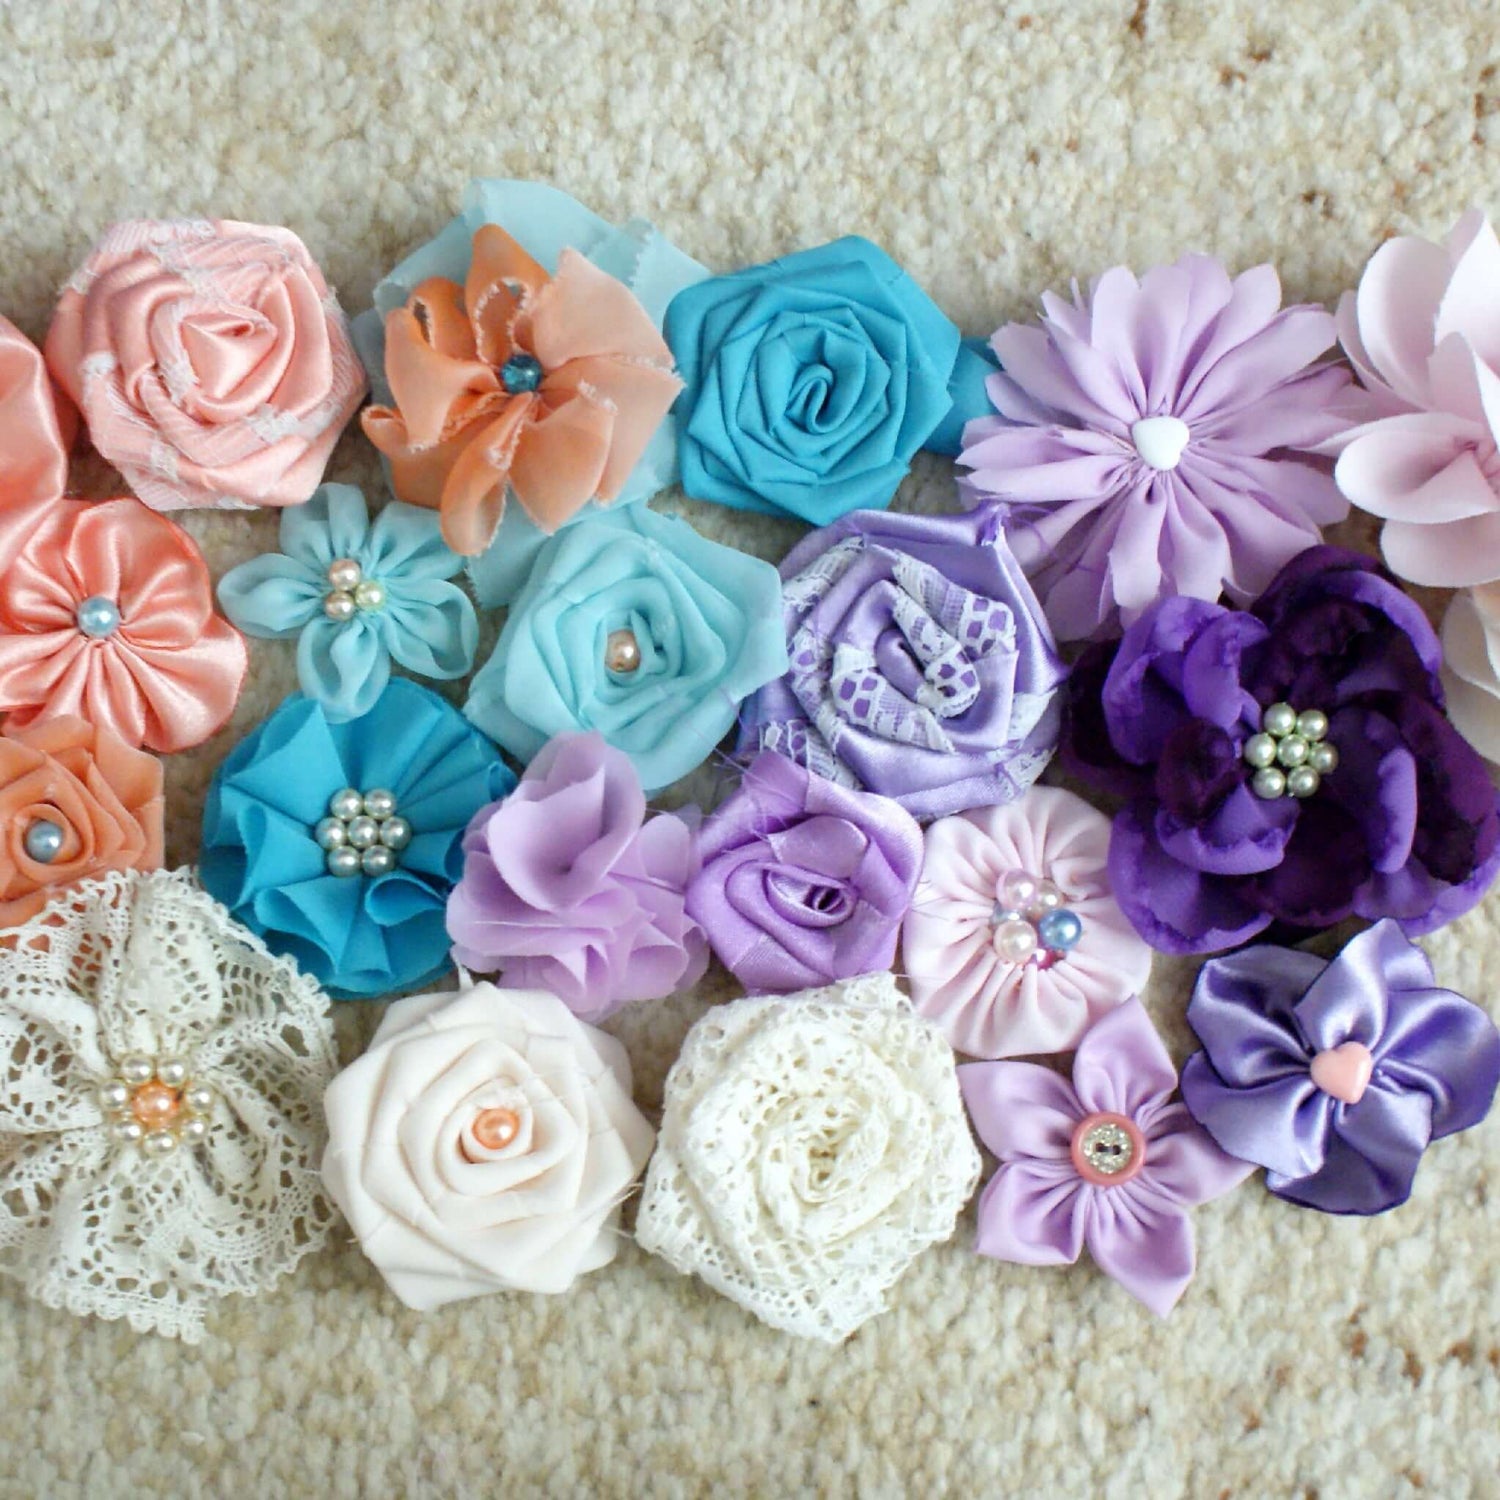 Discover elegant fabric flowers by Indian Petals. Perfect for weddings, home decor, and fashion! 🌼 #TextileArt